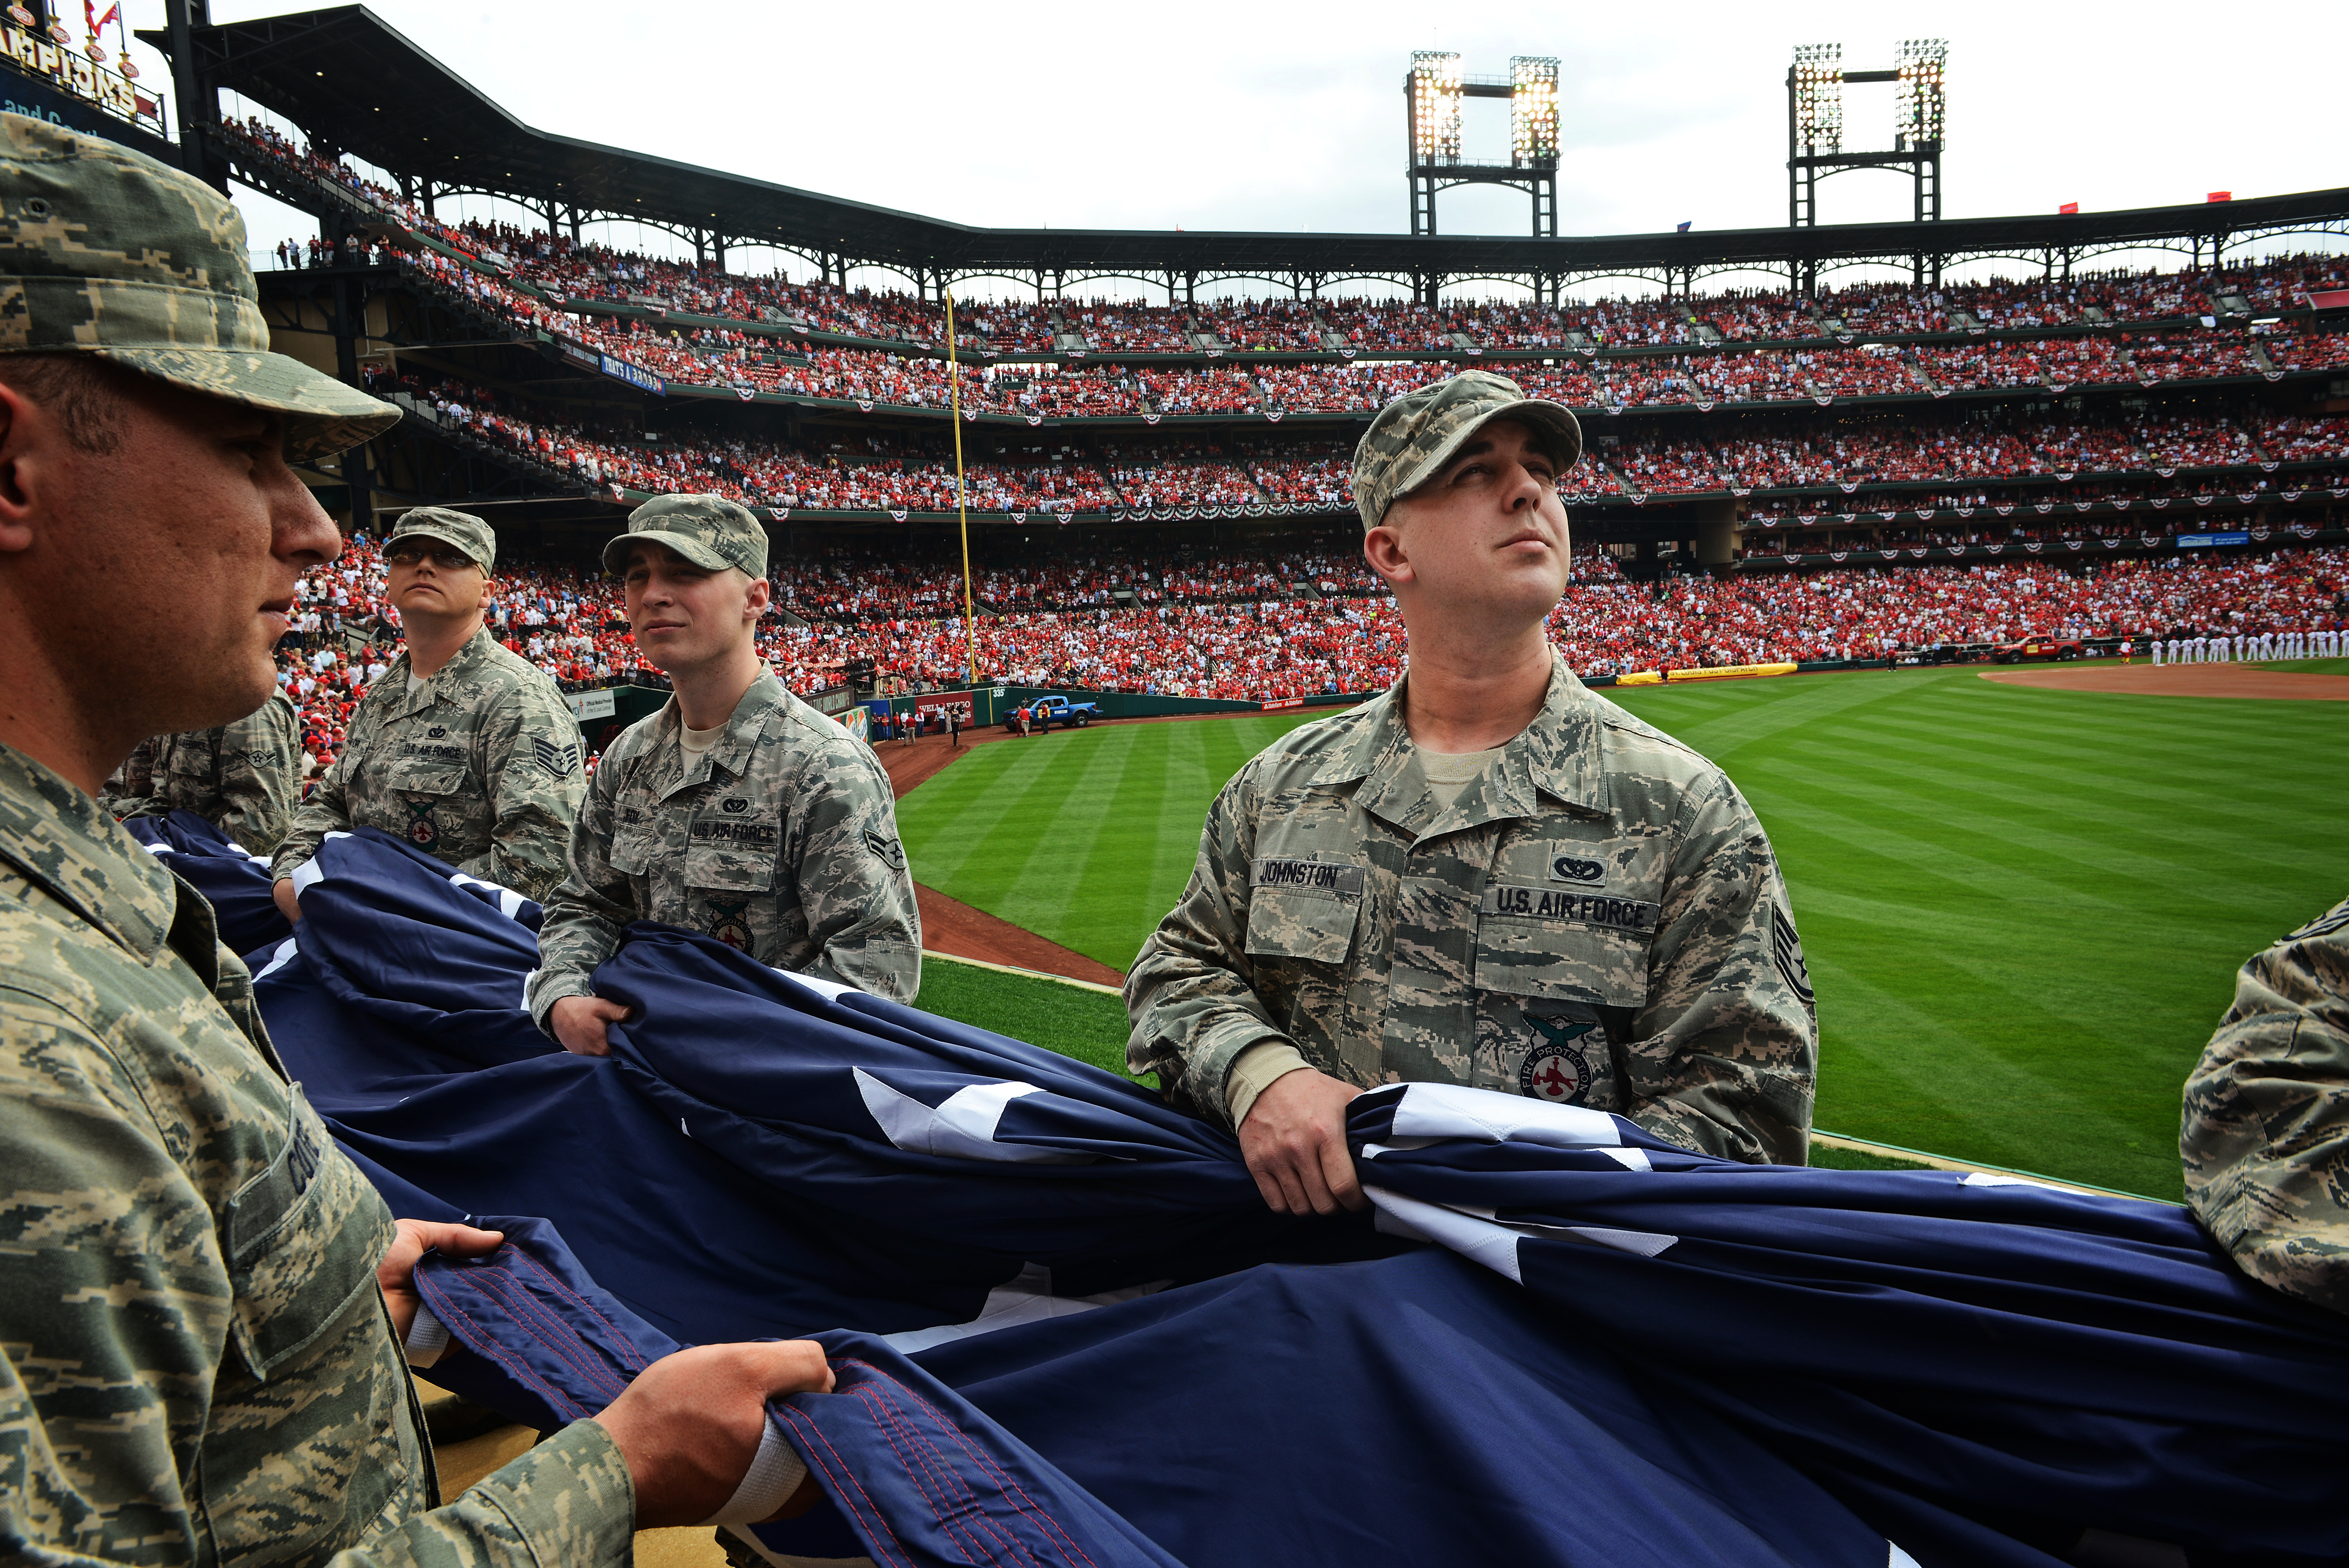 DVIDS - Images - Military Appreciation Night at Busch Stadium [Image 5 of 5]